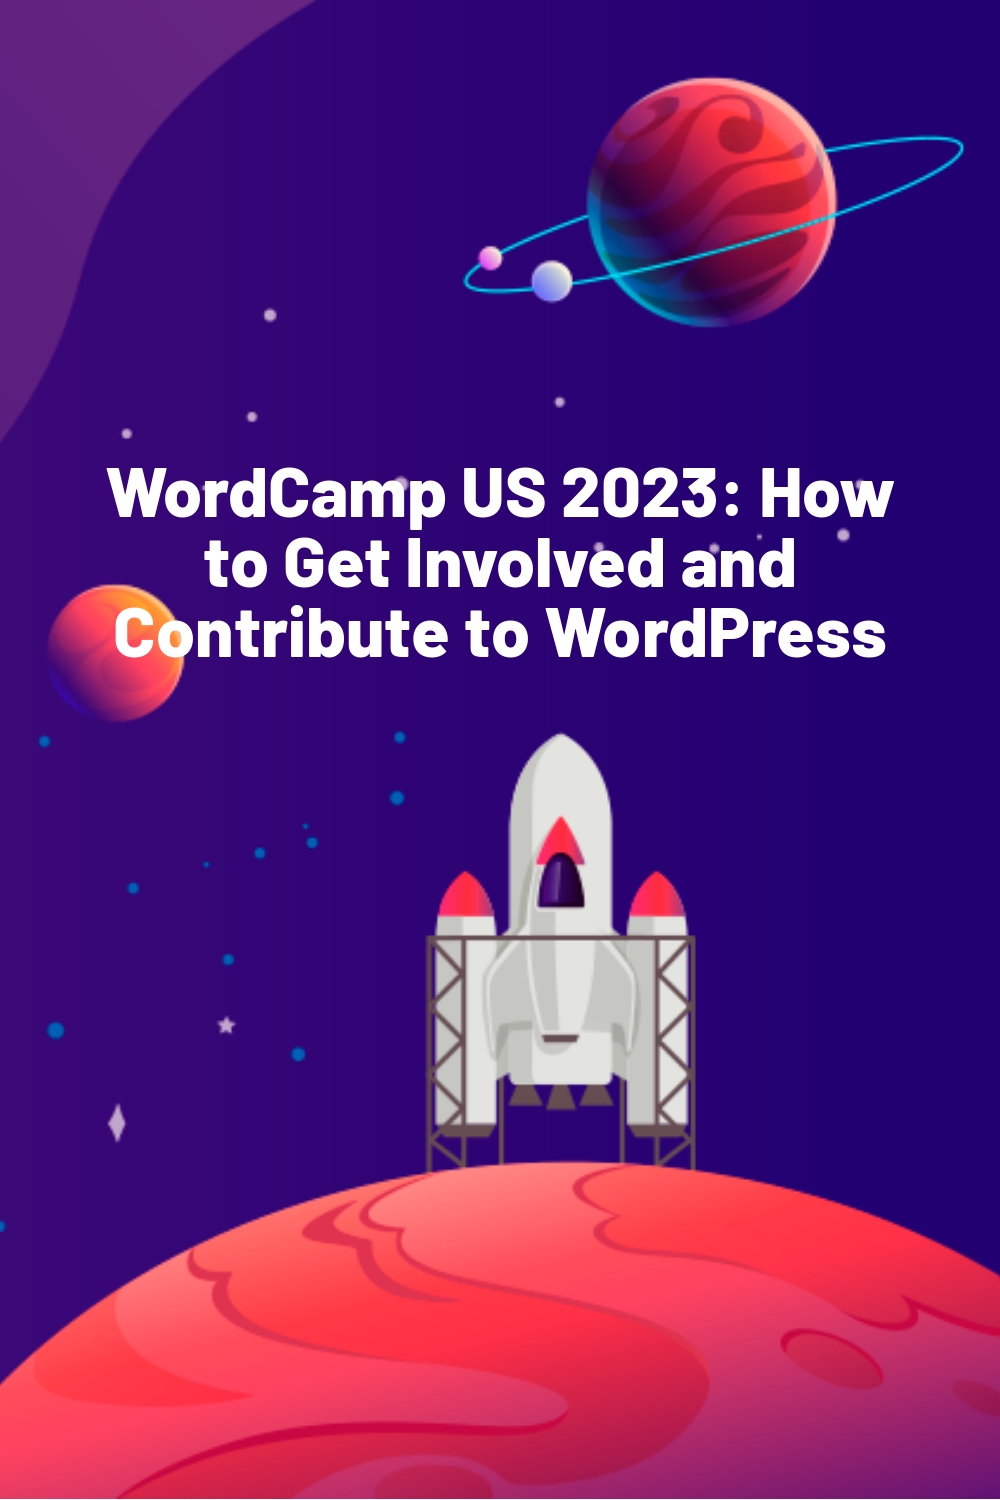 WordCamp US 2023: How to Get Involved and Contribute to WordPress